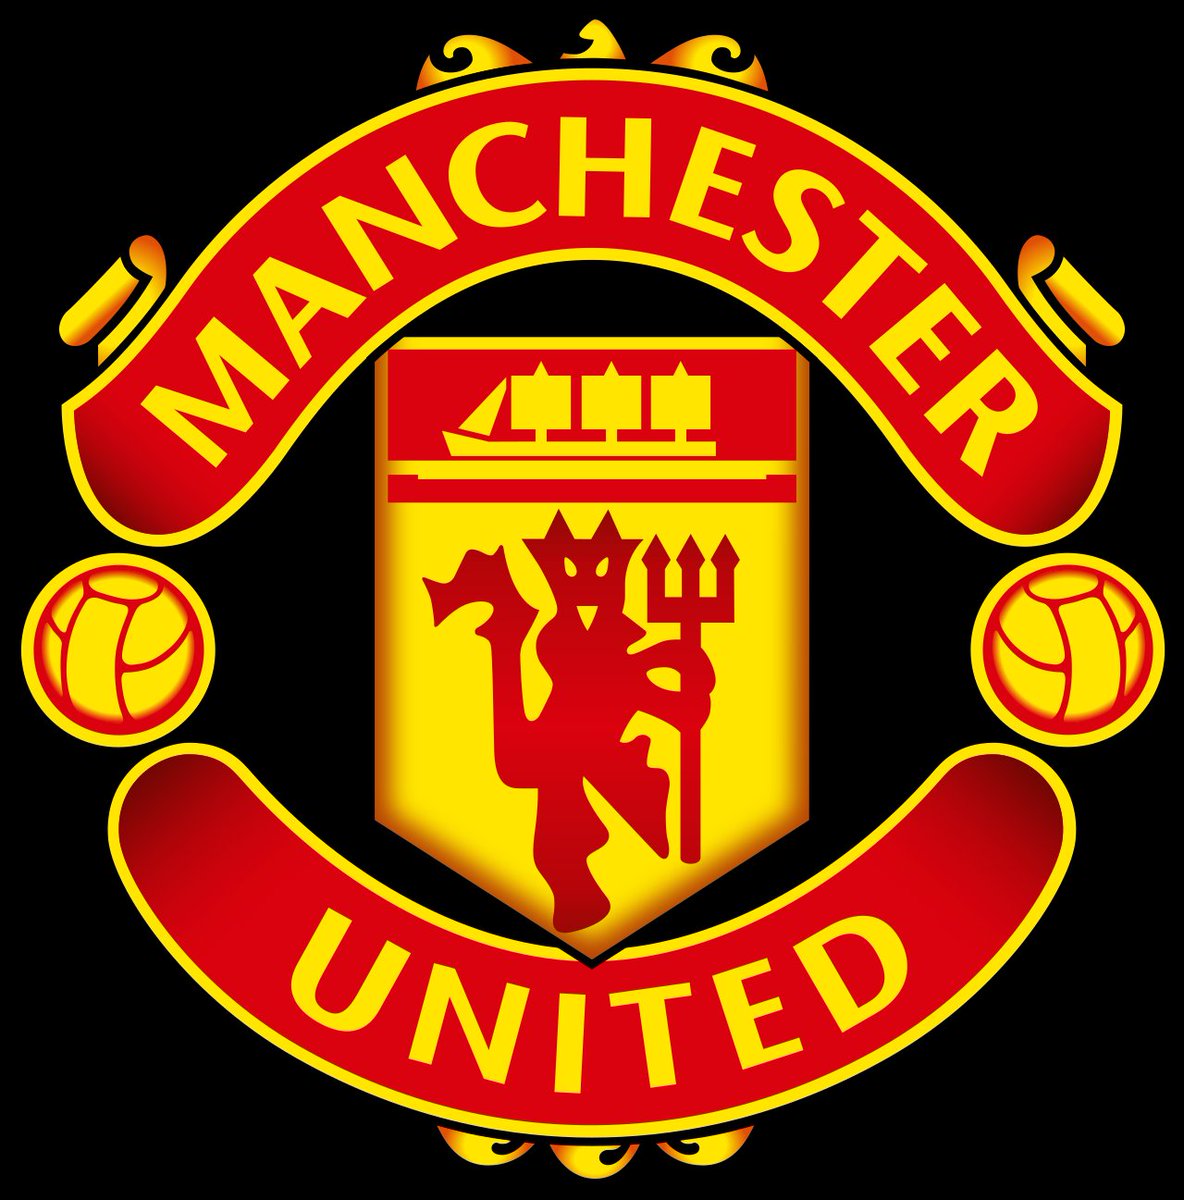 History- the closest any club comes near Real Madrid in terms of history is Manchester United.Manchester United was founded as Newton Heath LYR Football Club in 1878, changed its name to Manchester United in 1902 and moved to its current stadium, Old Trafford, in 1910.